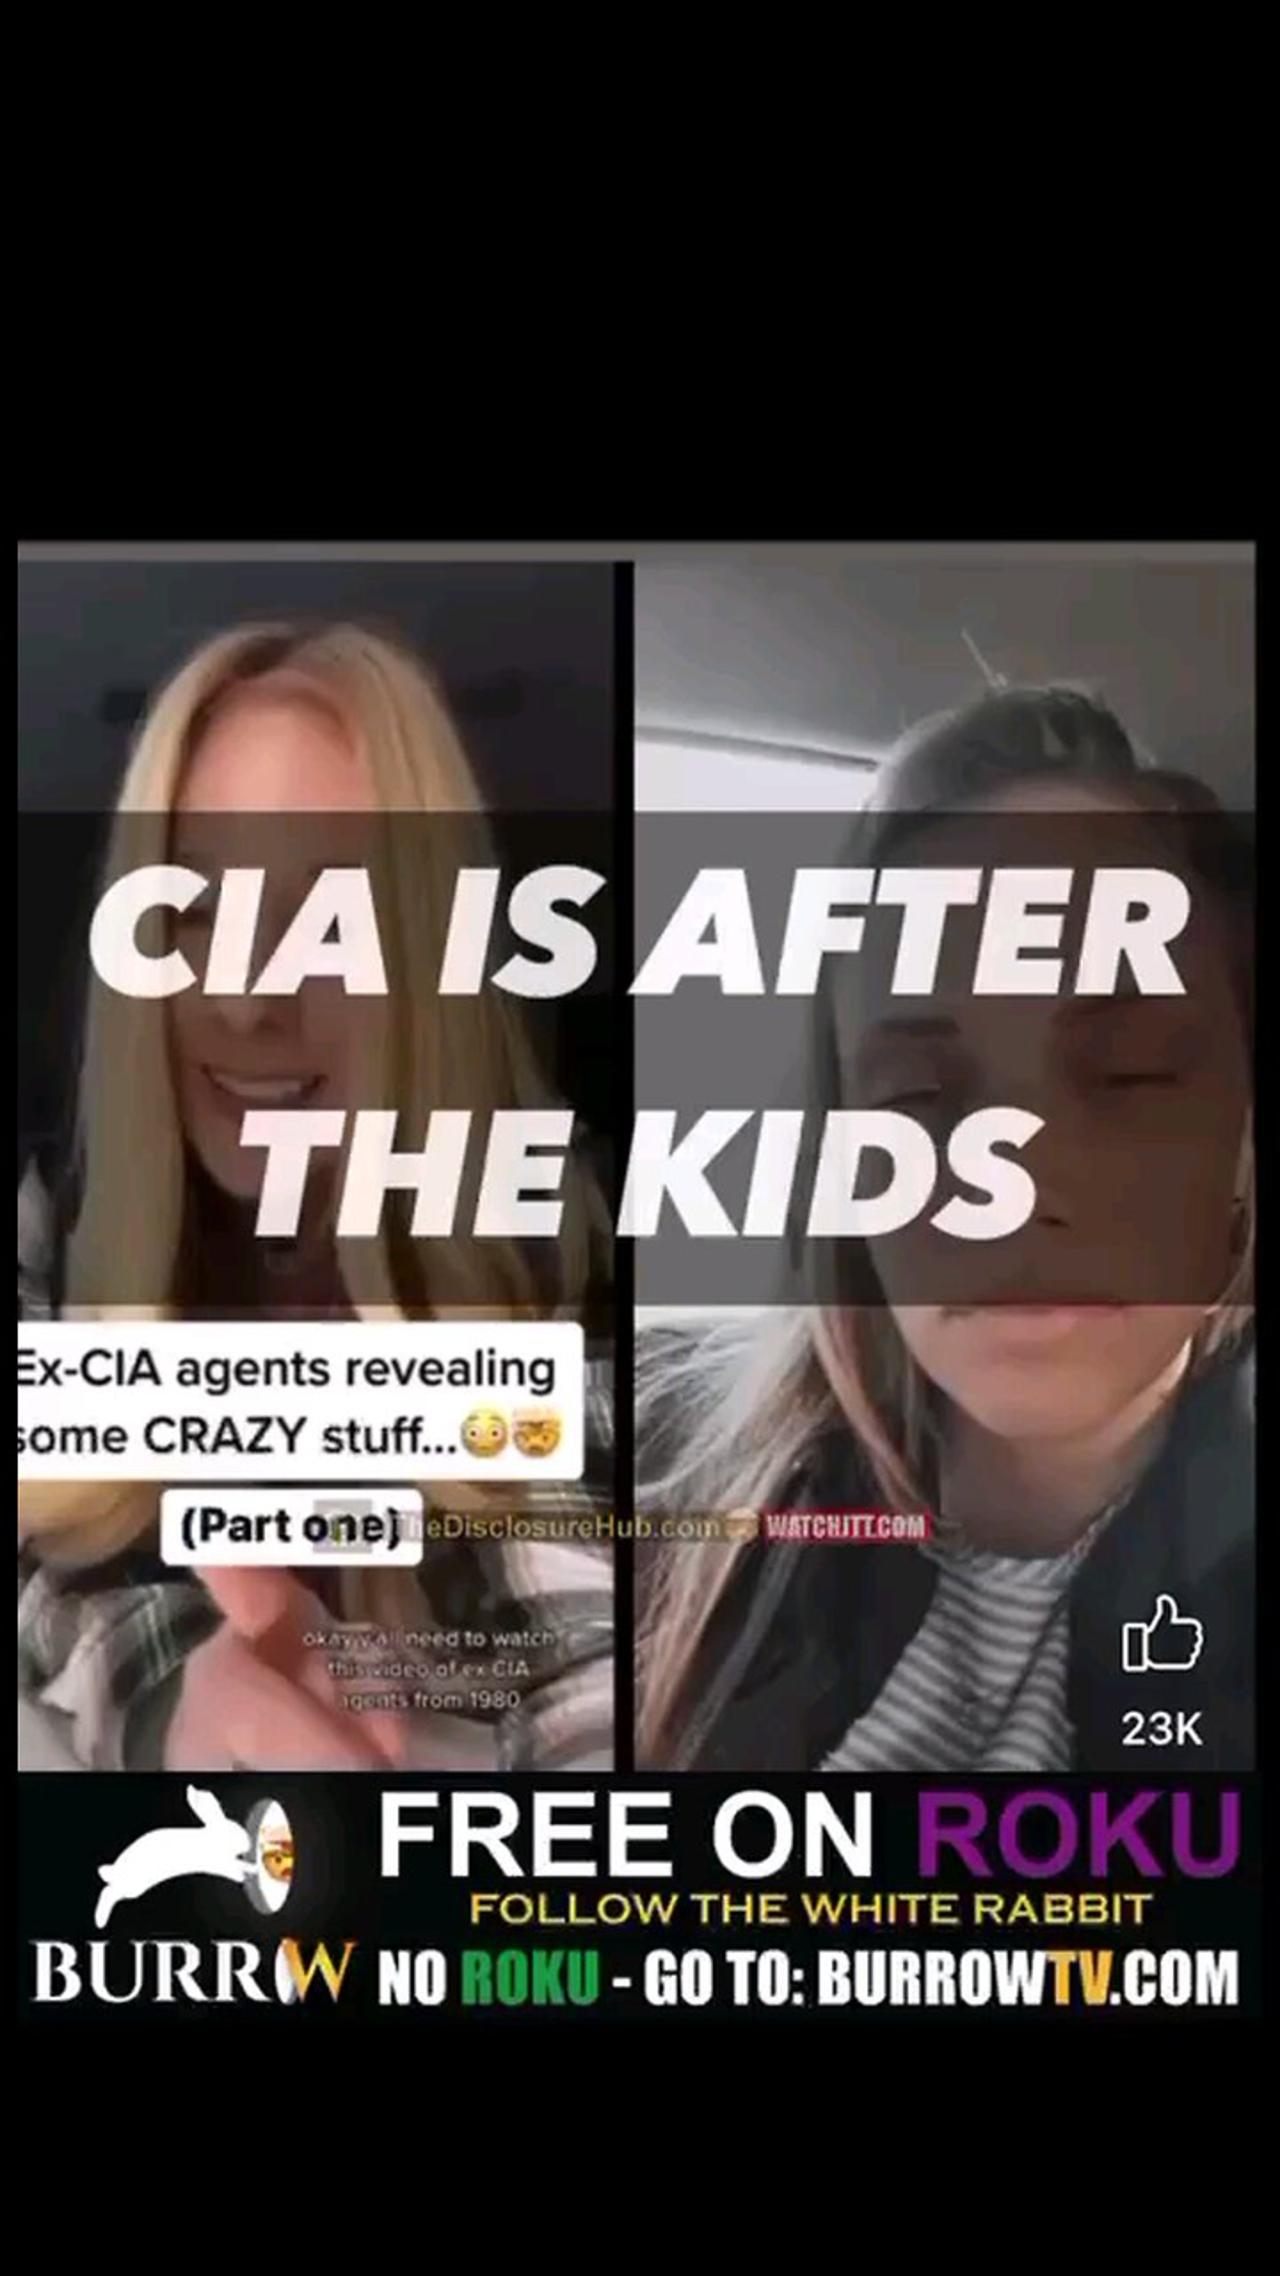 The CIA is behind everything, they are after all of our kids.... Listen to this 1980s interview